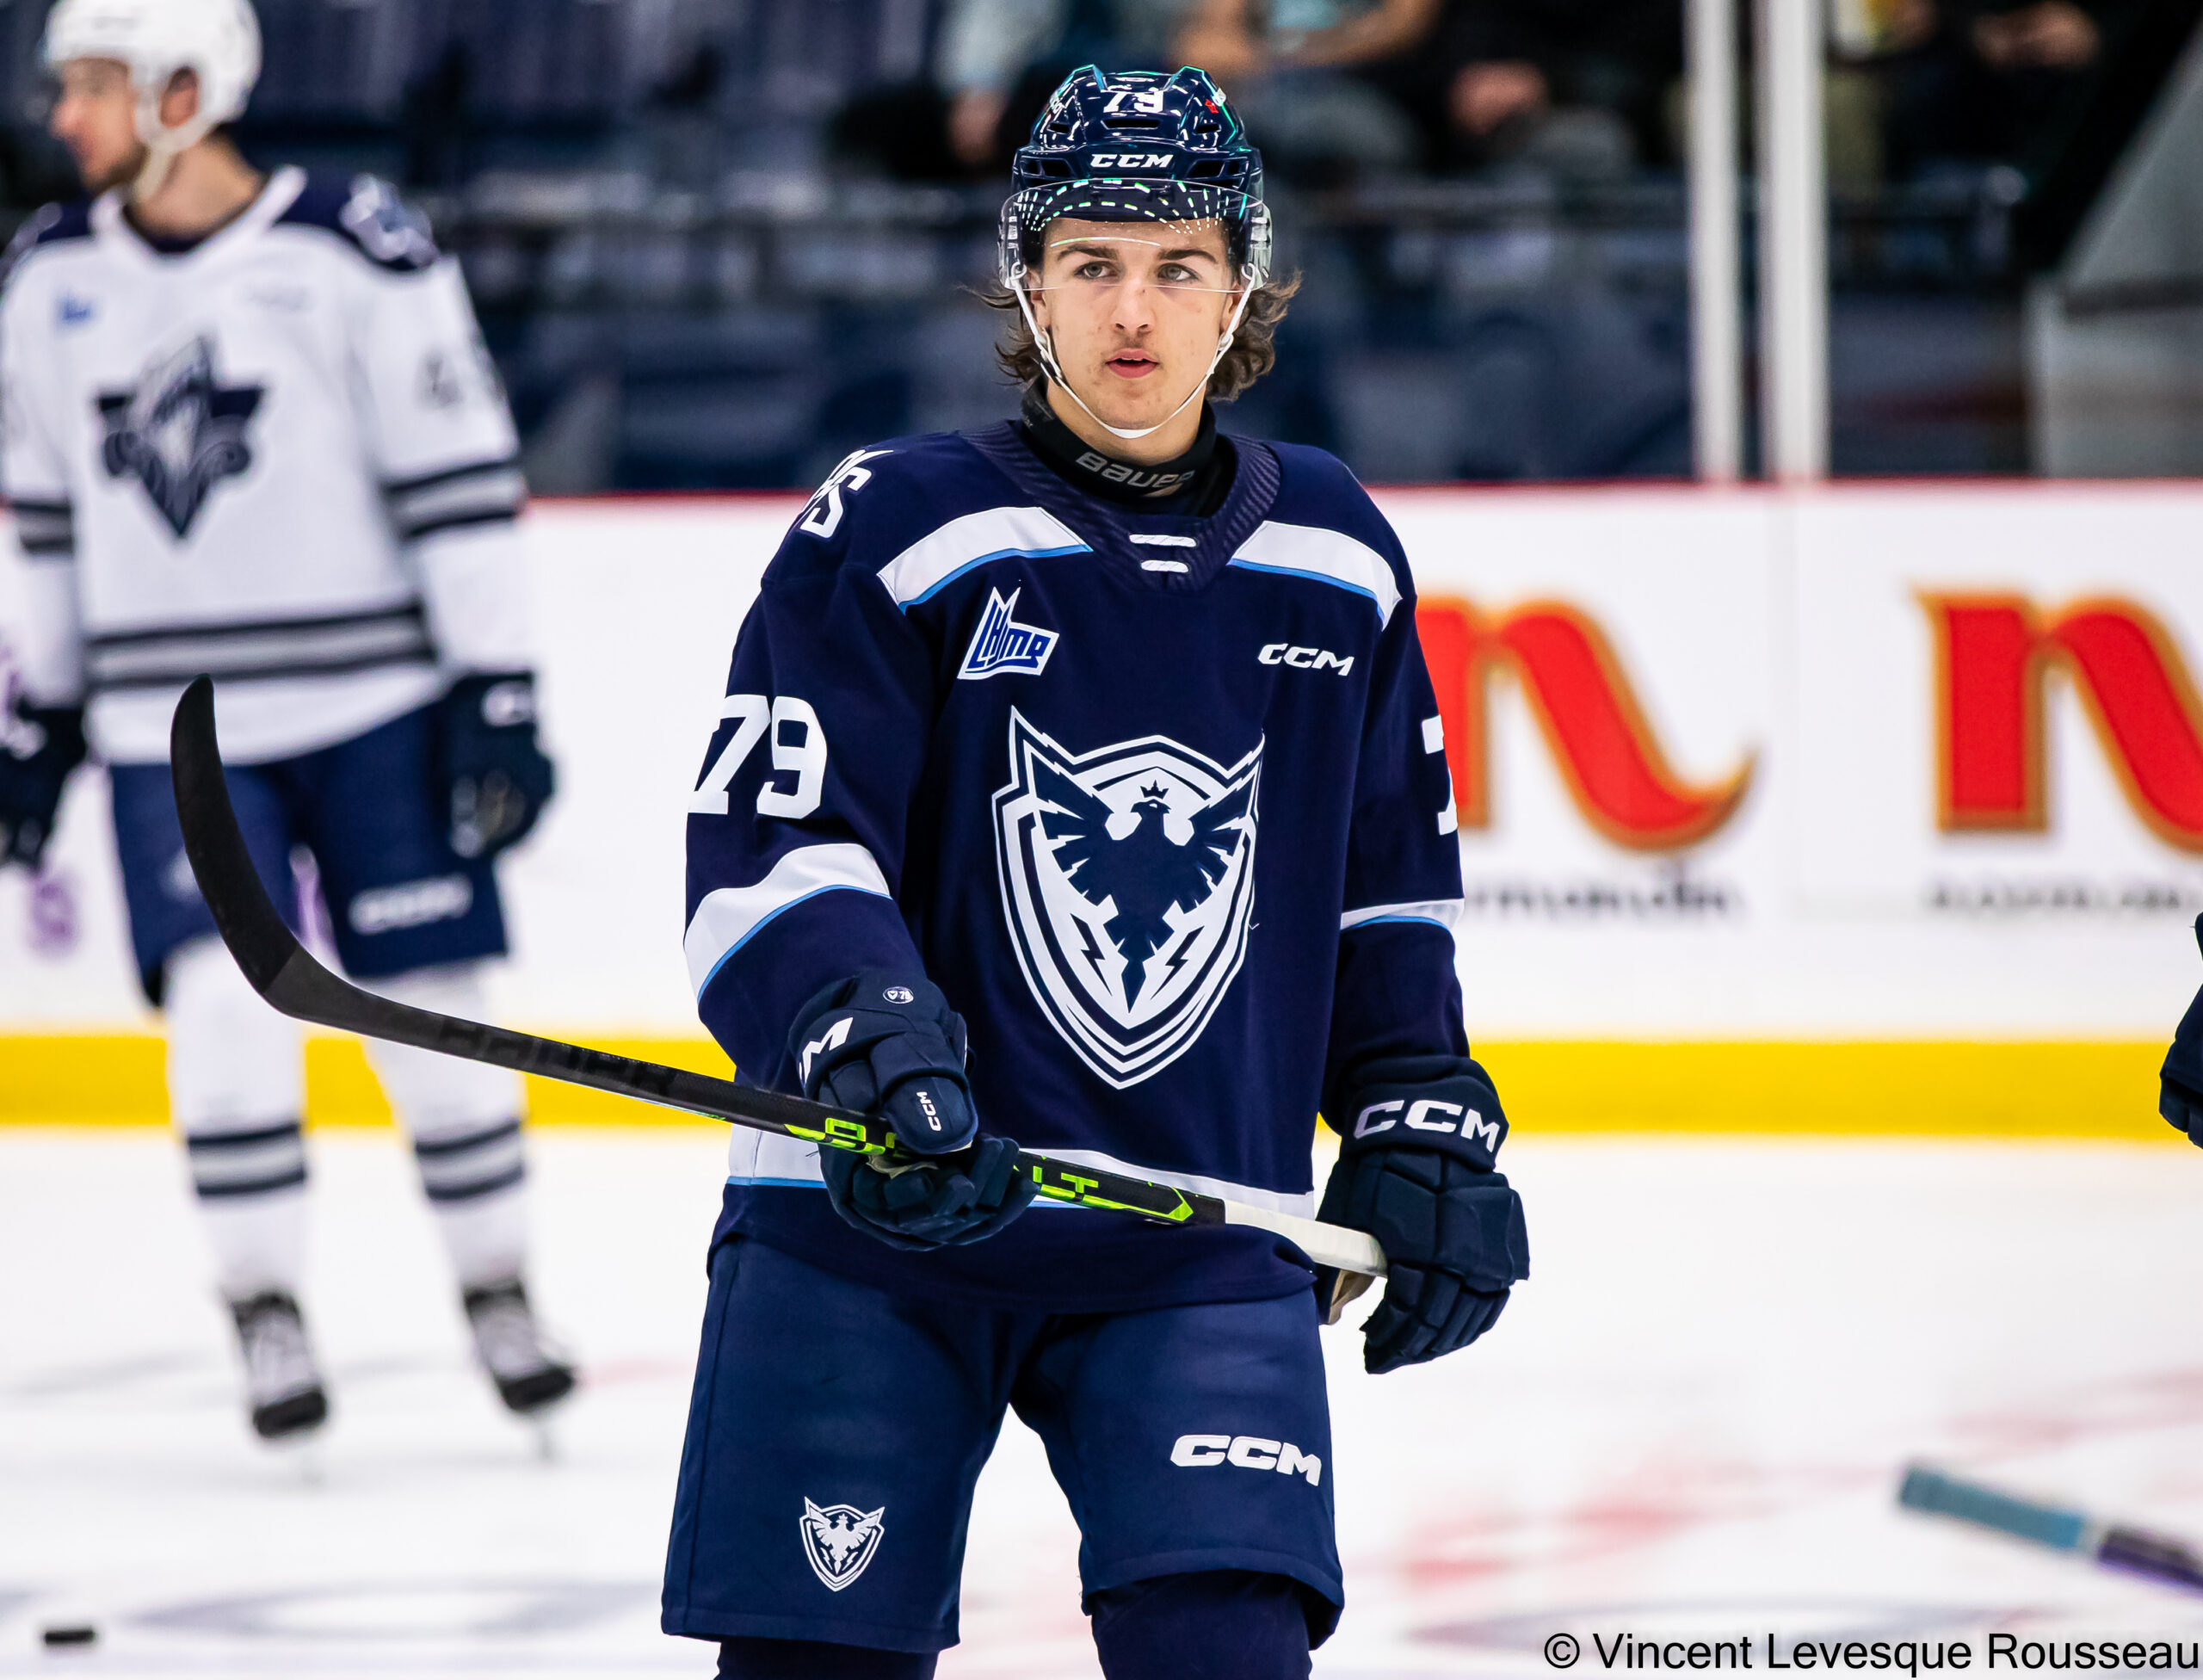 Thomas Milic is as focused as ever heading into 2023 NHL Draft